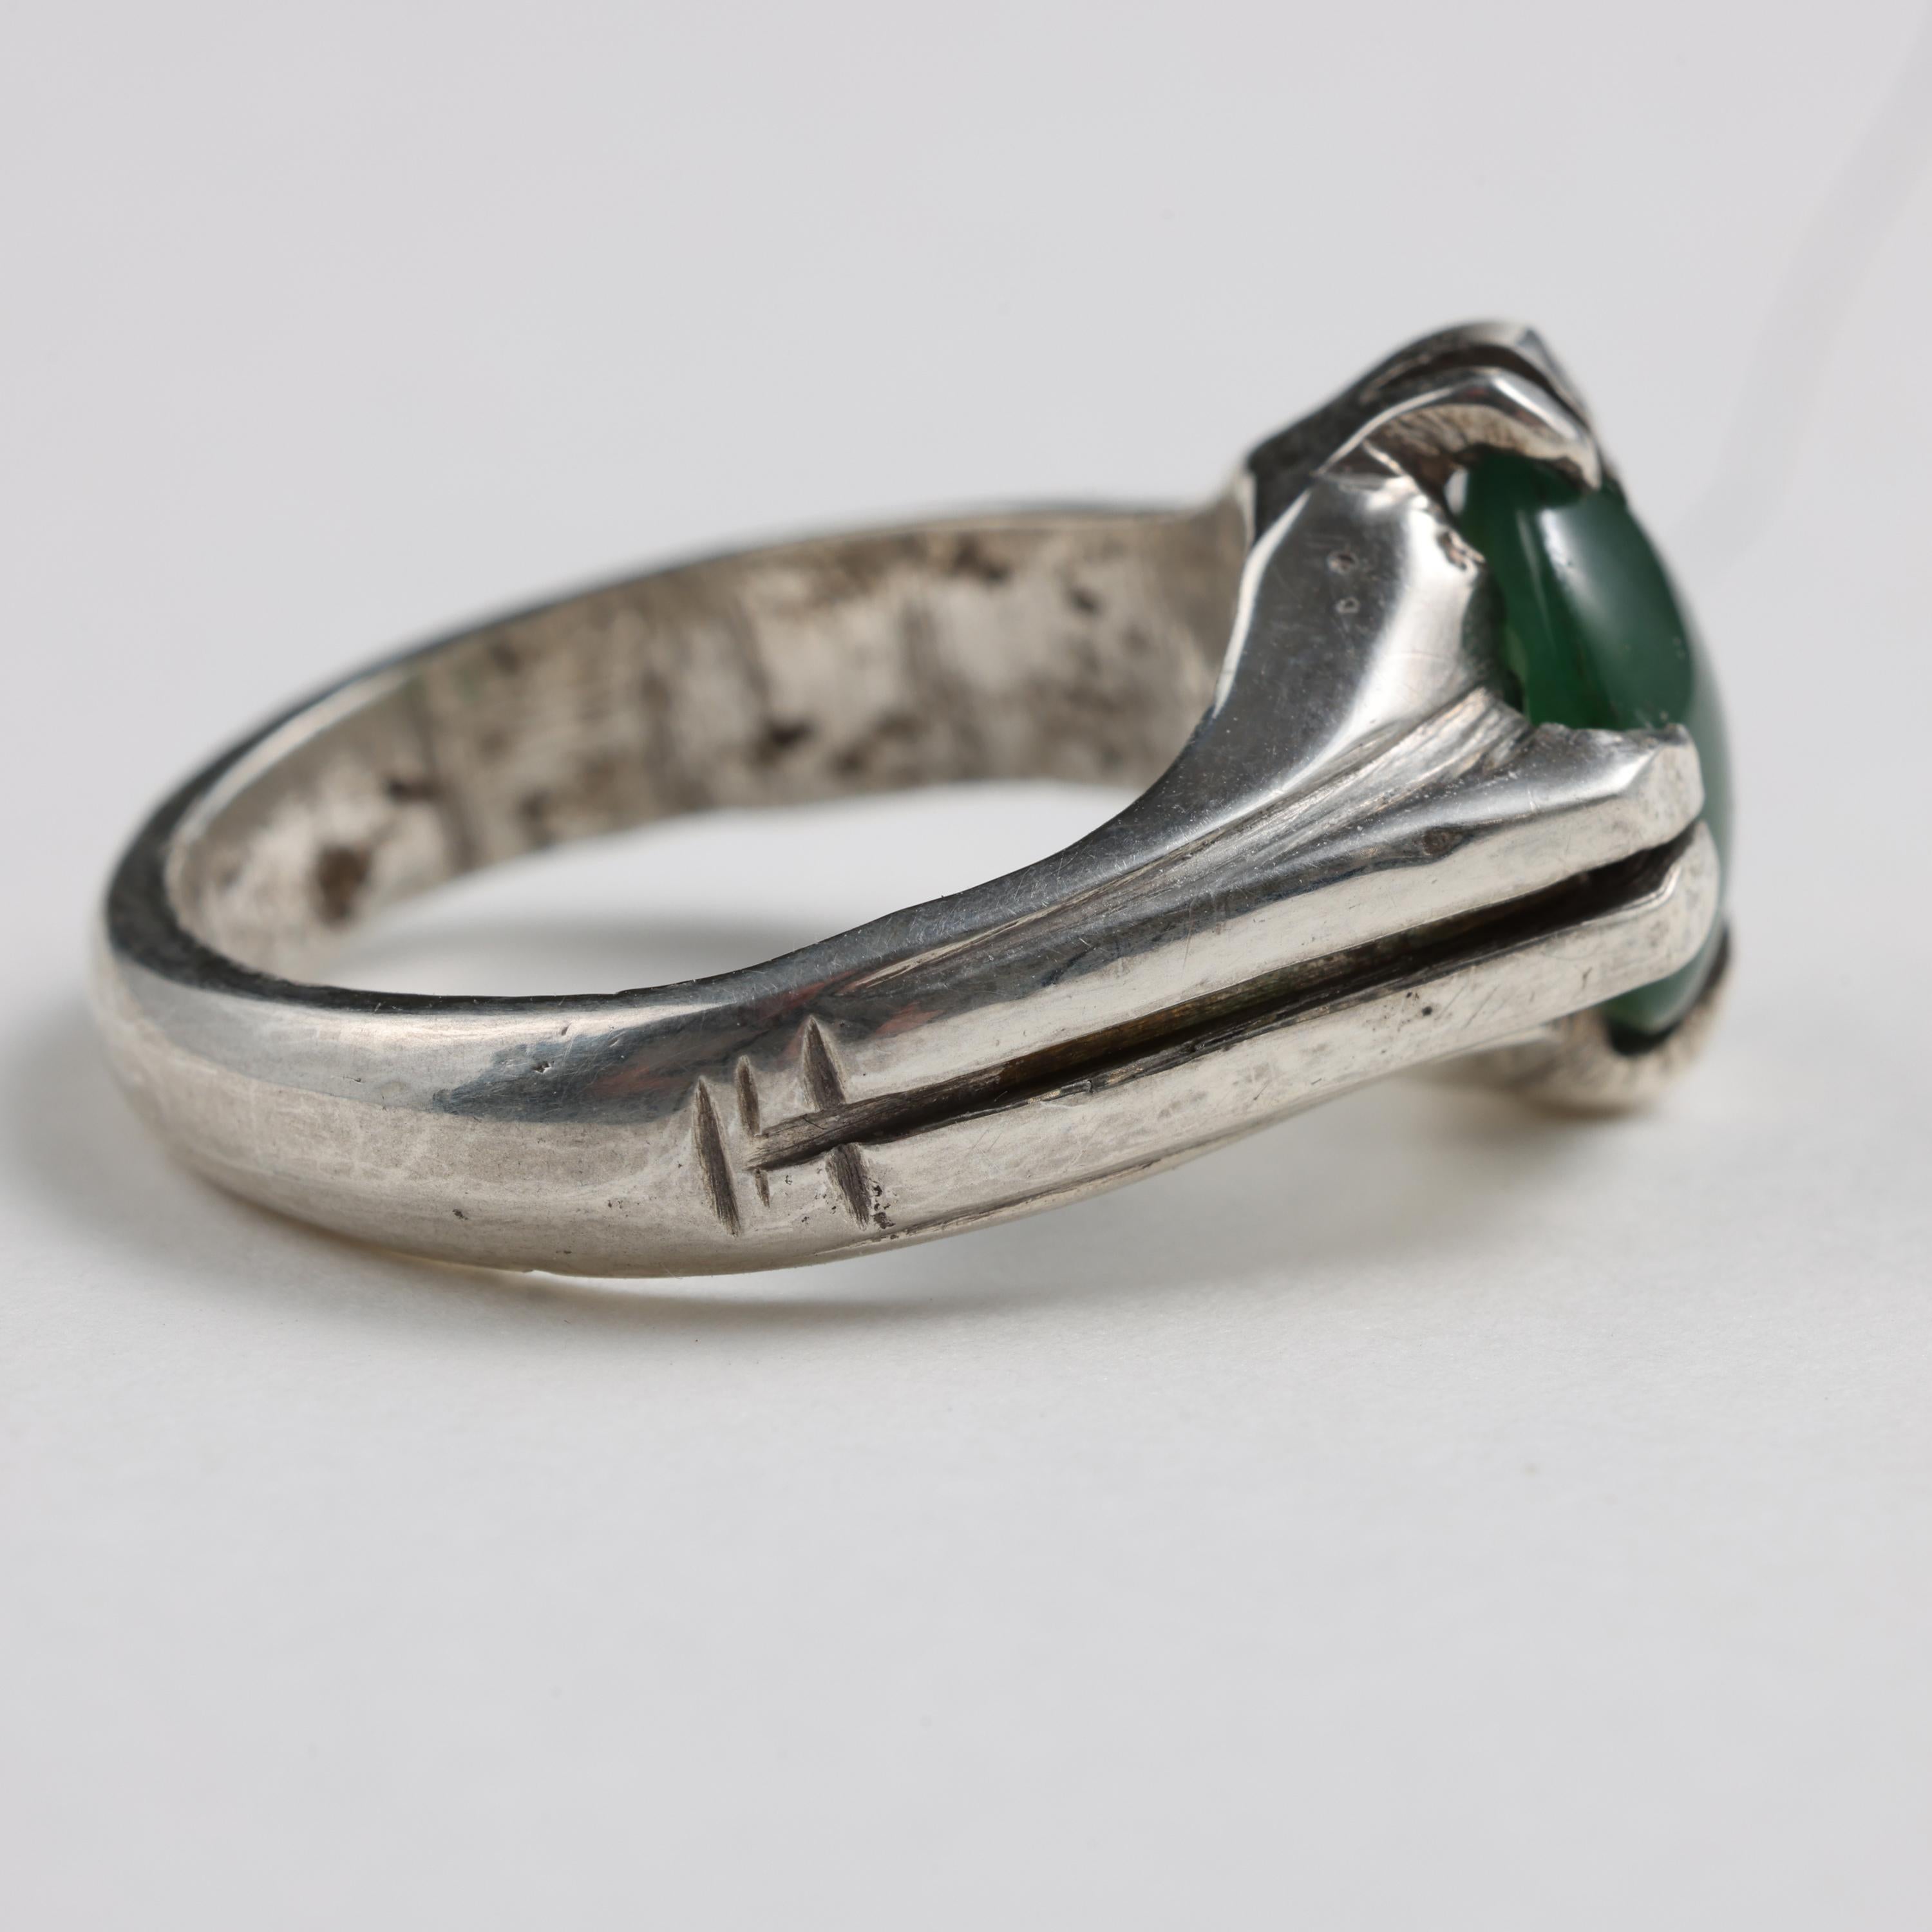 Artisan Omphacite Jade Ring in Silver, Certified Untreated Fei Cui